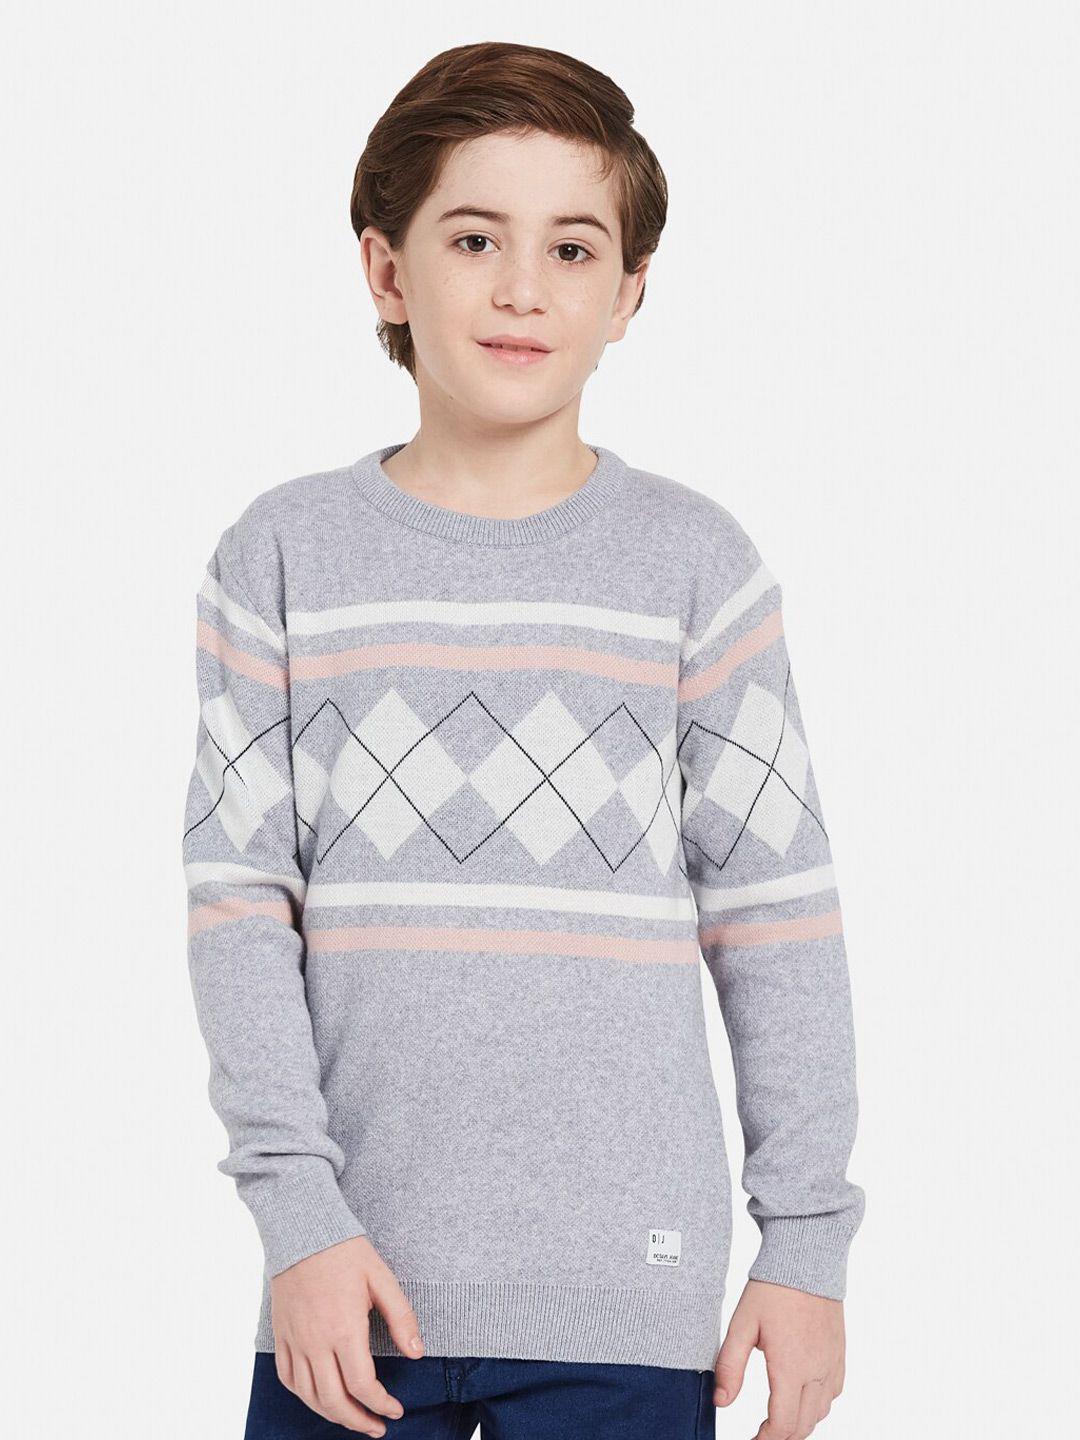 octave boys geometric printed cotton pullover sweater